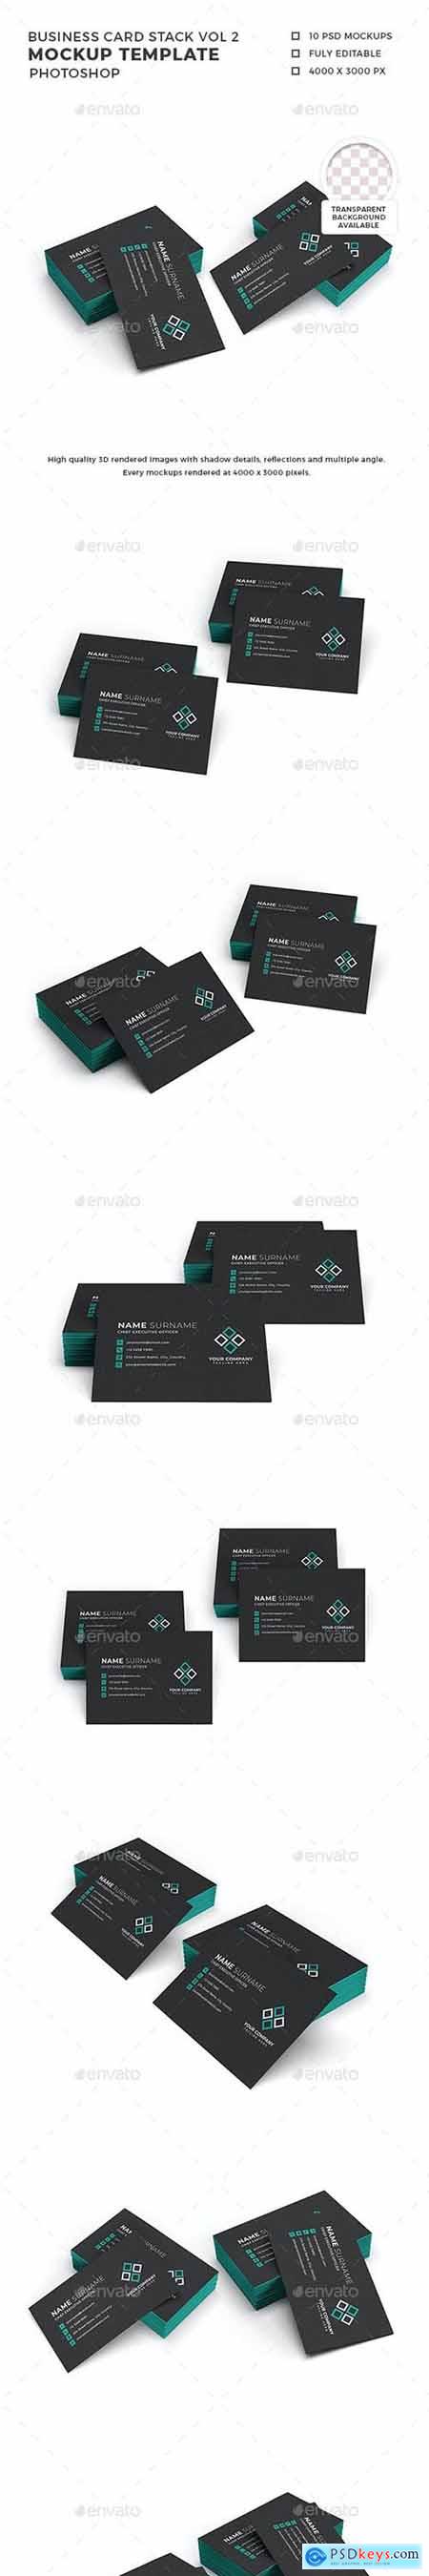 Business Card Stack Mockup Template Vol 2 32444758